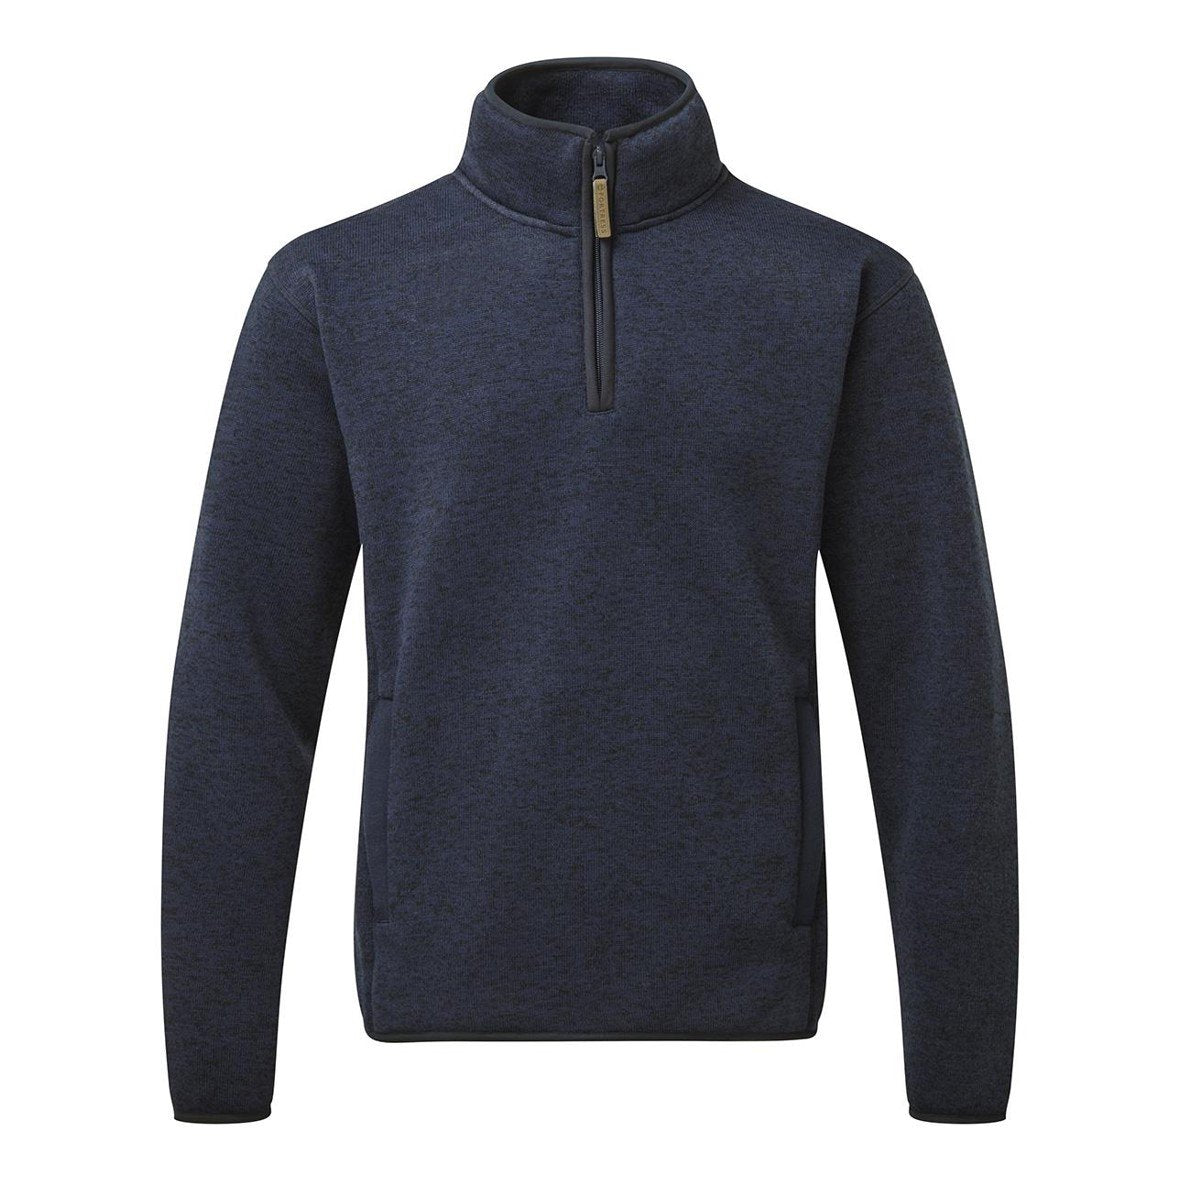 238 FORTRESS EASTON 1/4 ZIP SWEATER NAVY AT TED JOHNSONS